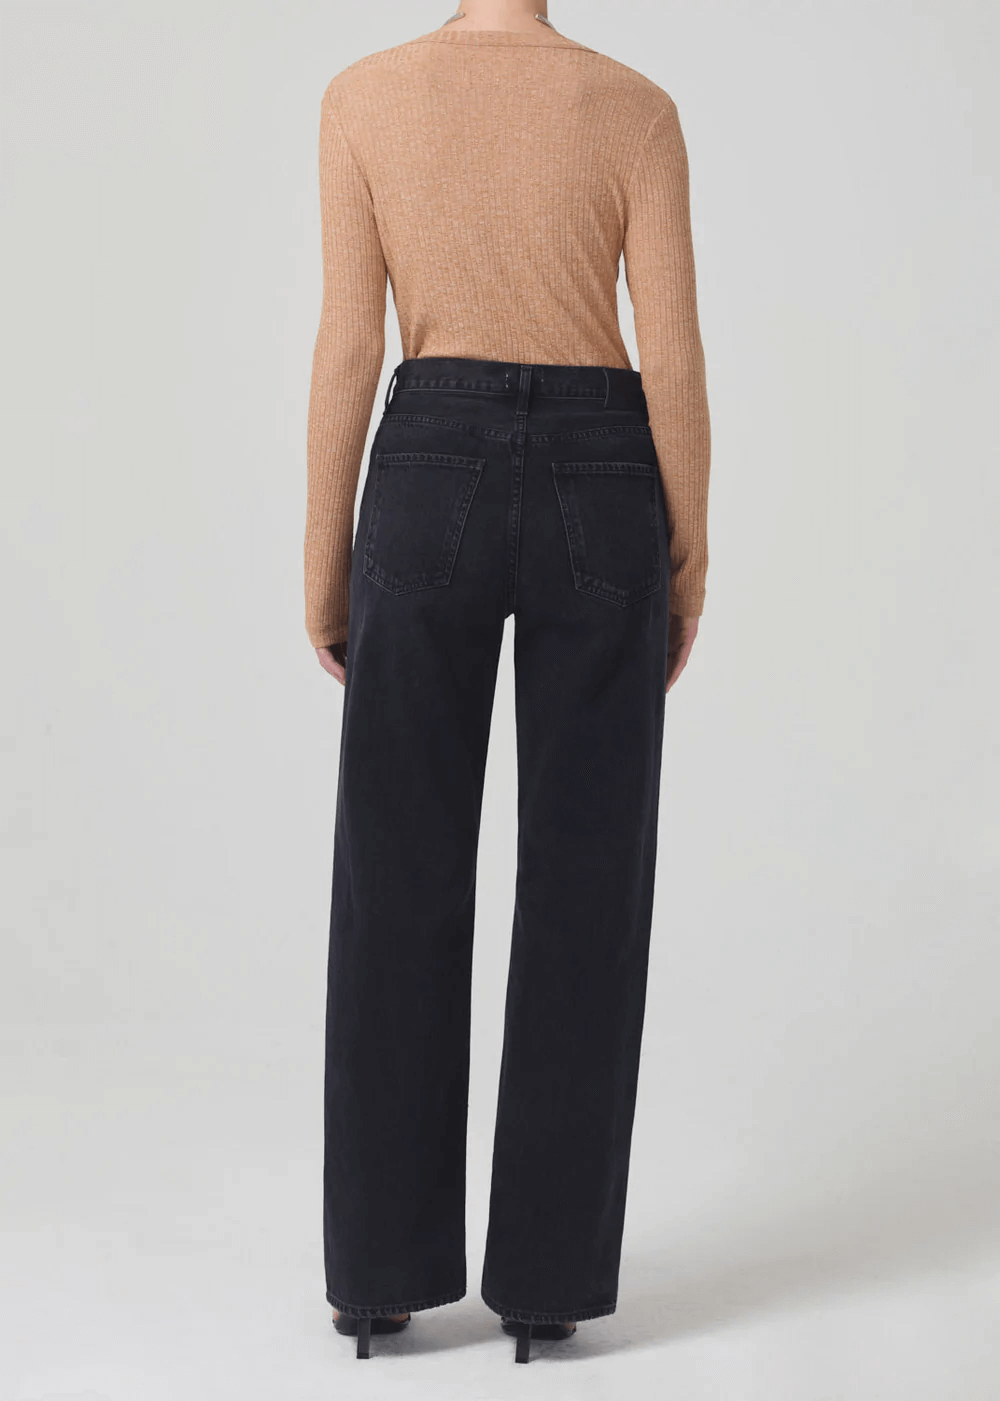 Citizens Of Humanity Annina Trouser Jean in Avalon available at TNT The New Trend